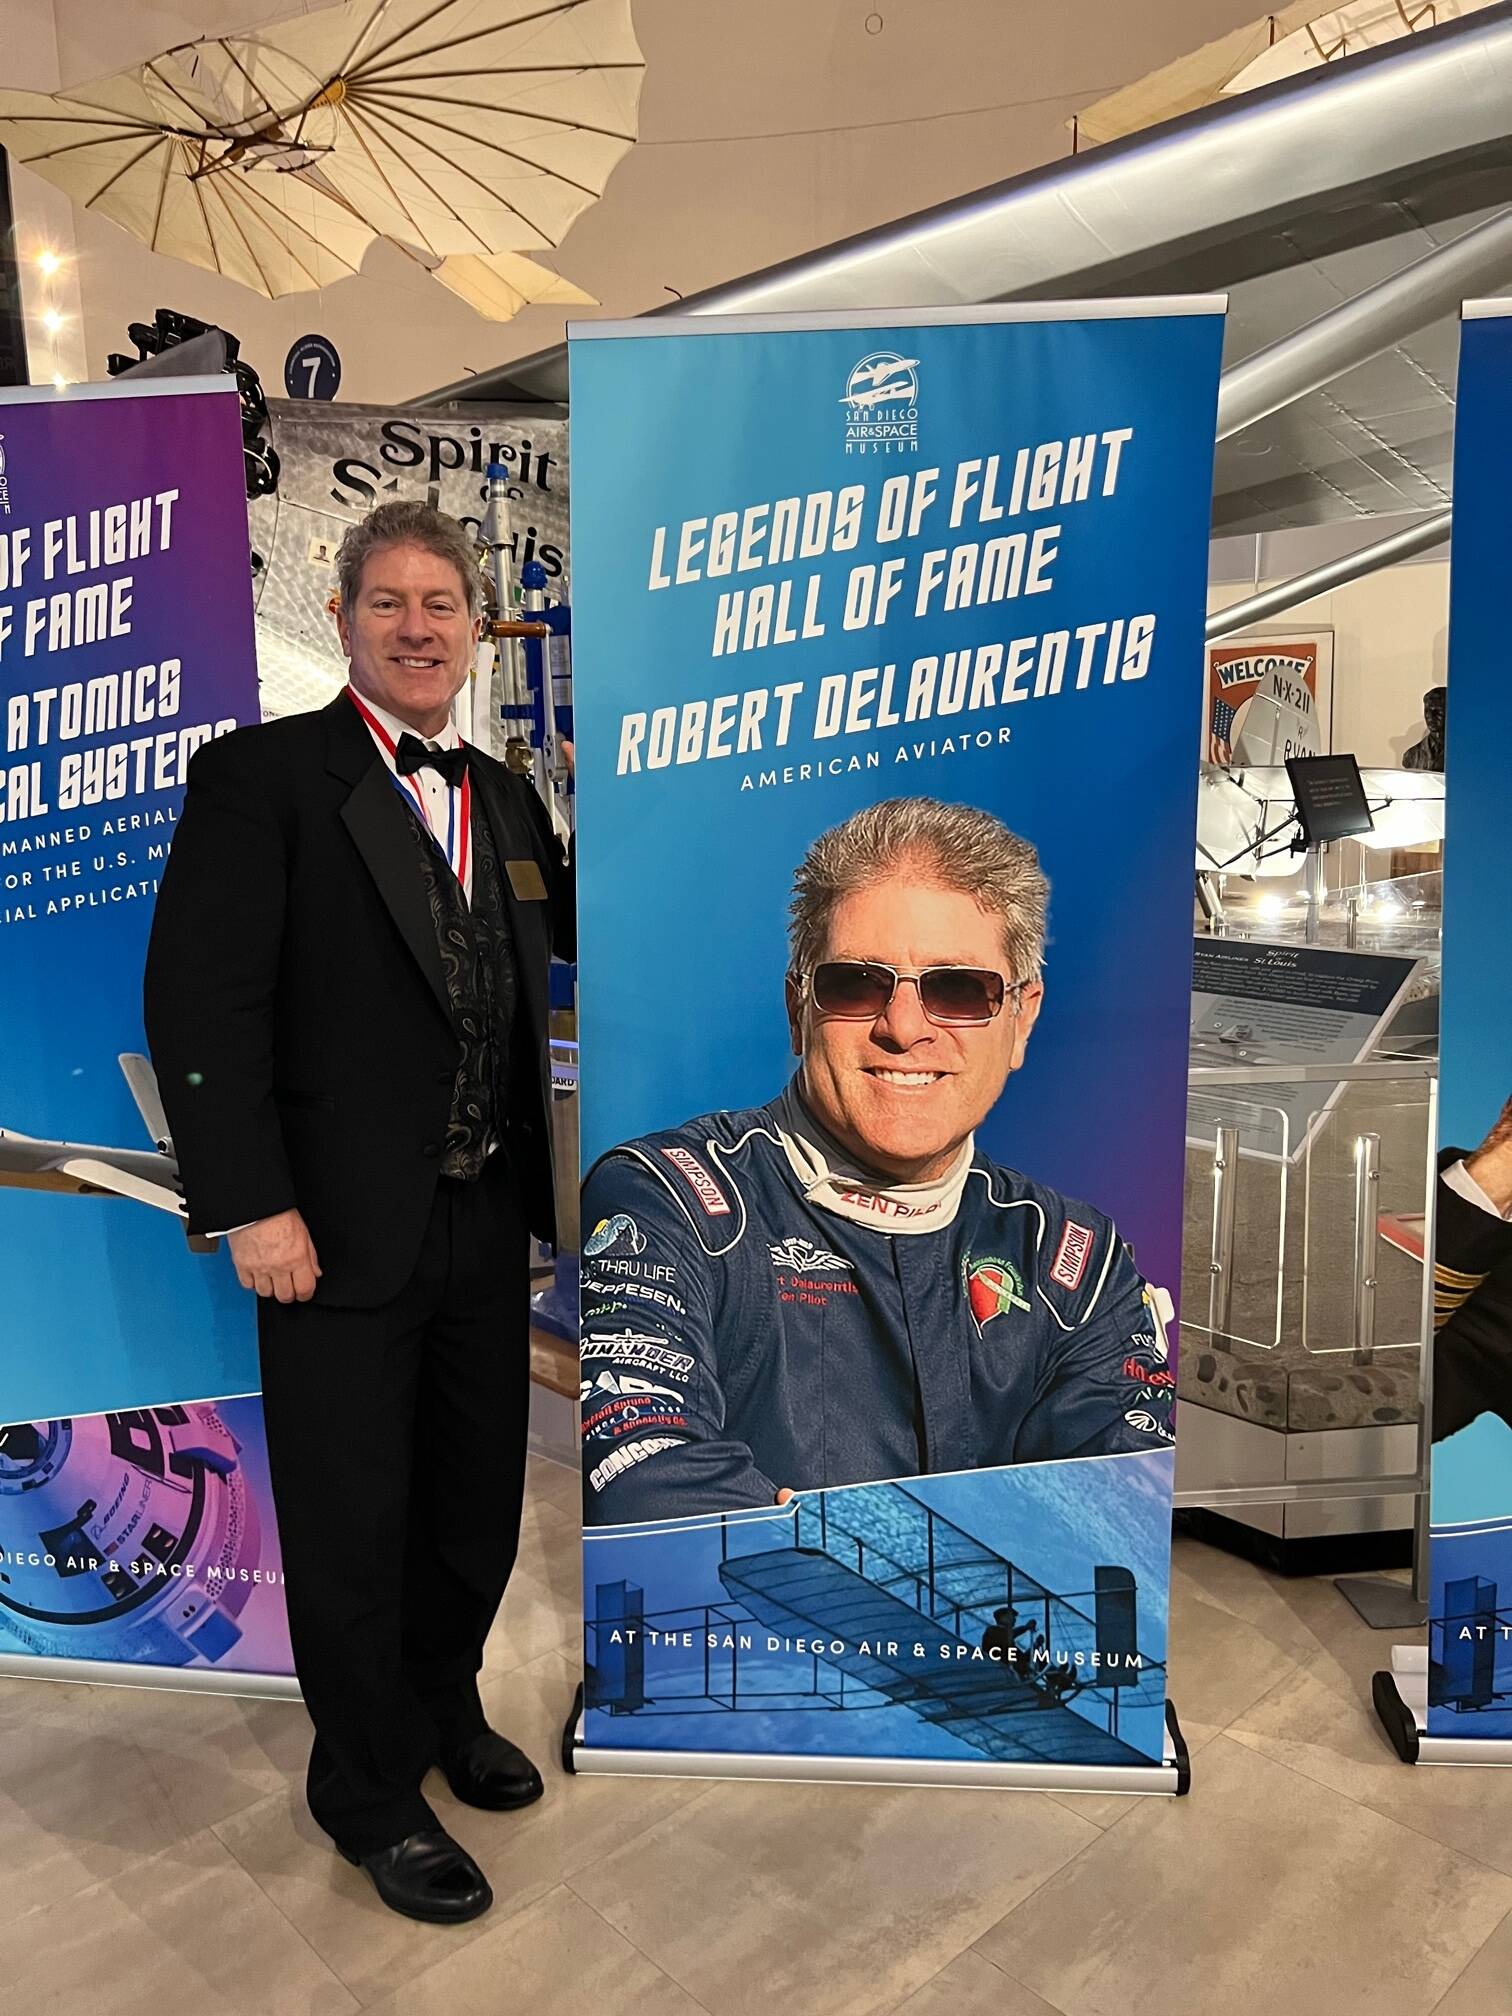 Robert DeLaurentis at the San Diego Air Space Museum. (Photo provided)